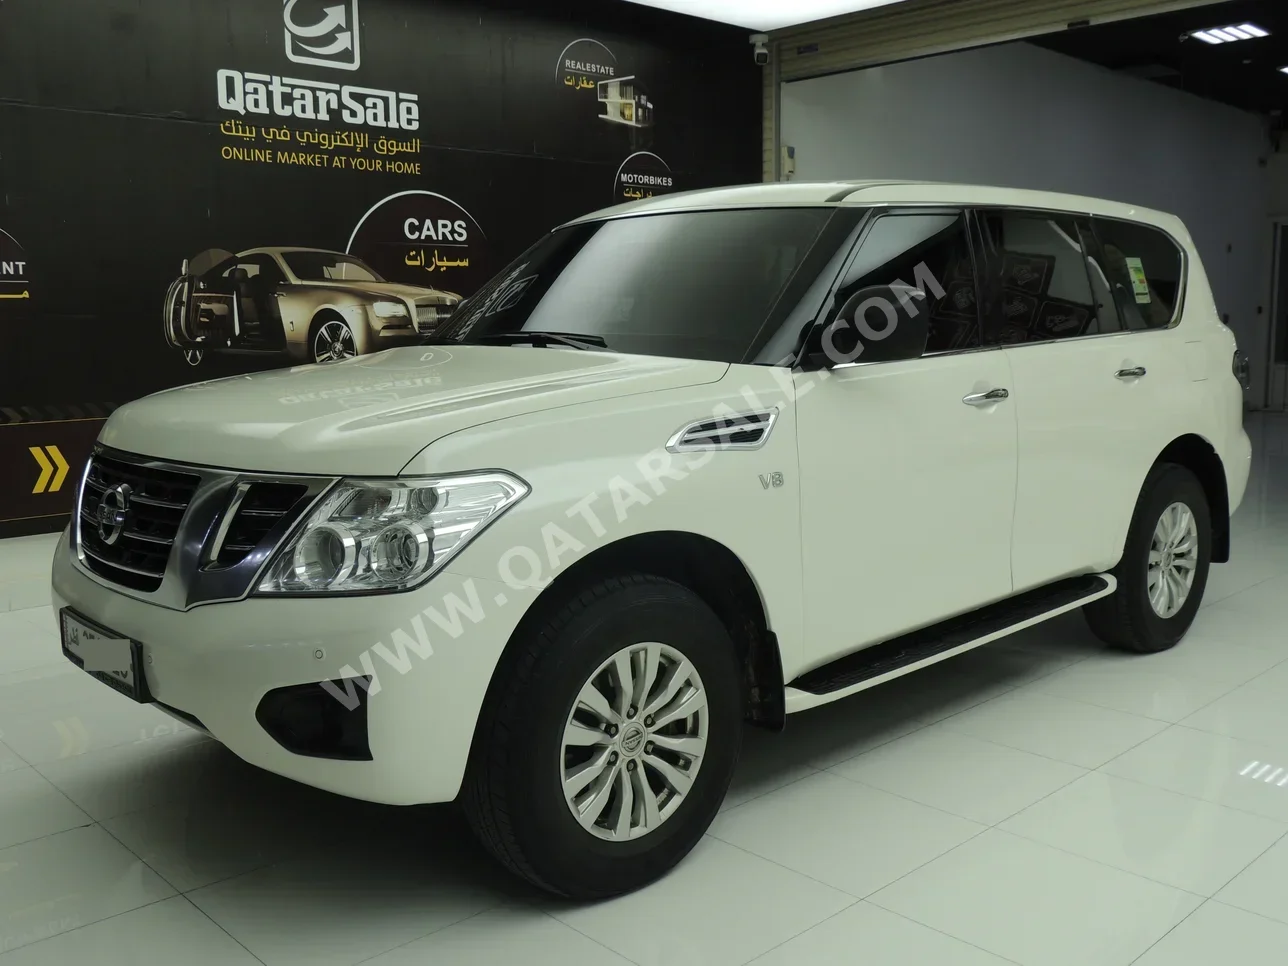 Nissan  Patrol  XE  2019  Automatic  45,000 Km  8 Cylinder  Four Wheel Drive (4WD)  SUV  White